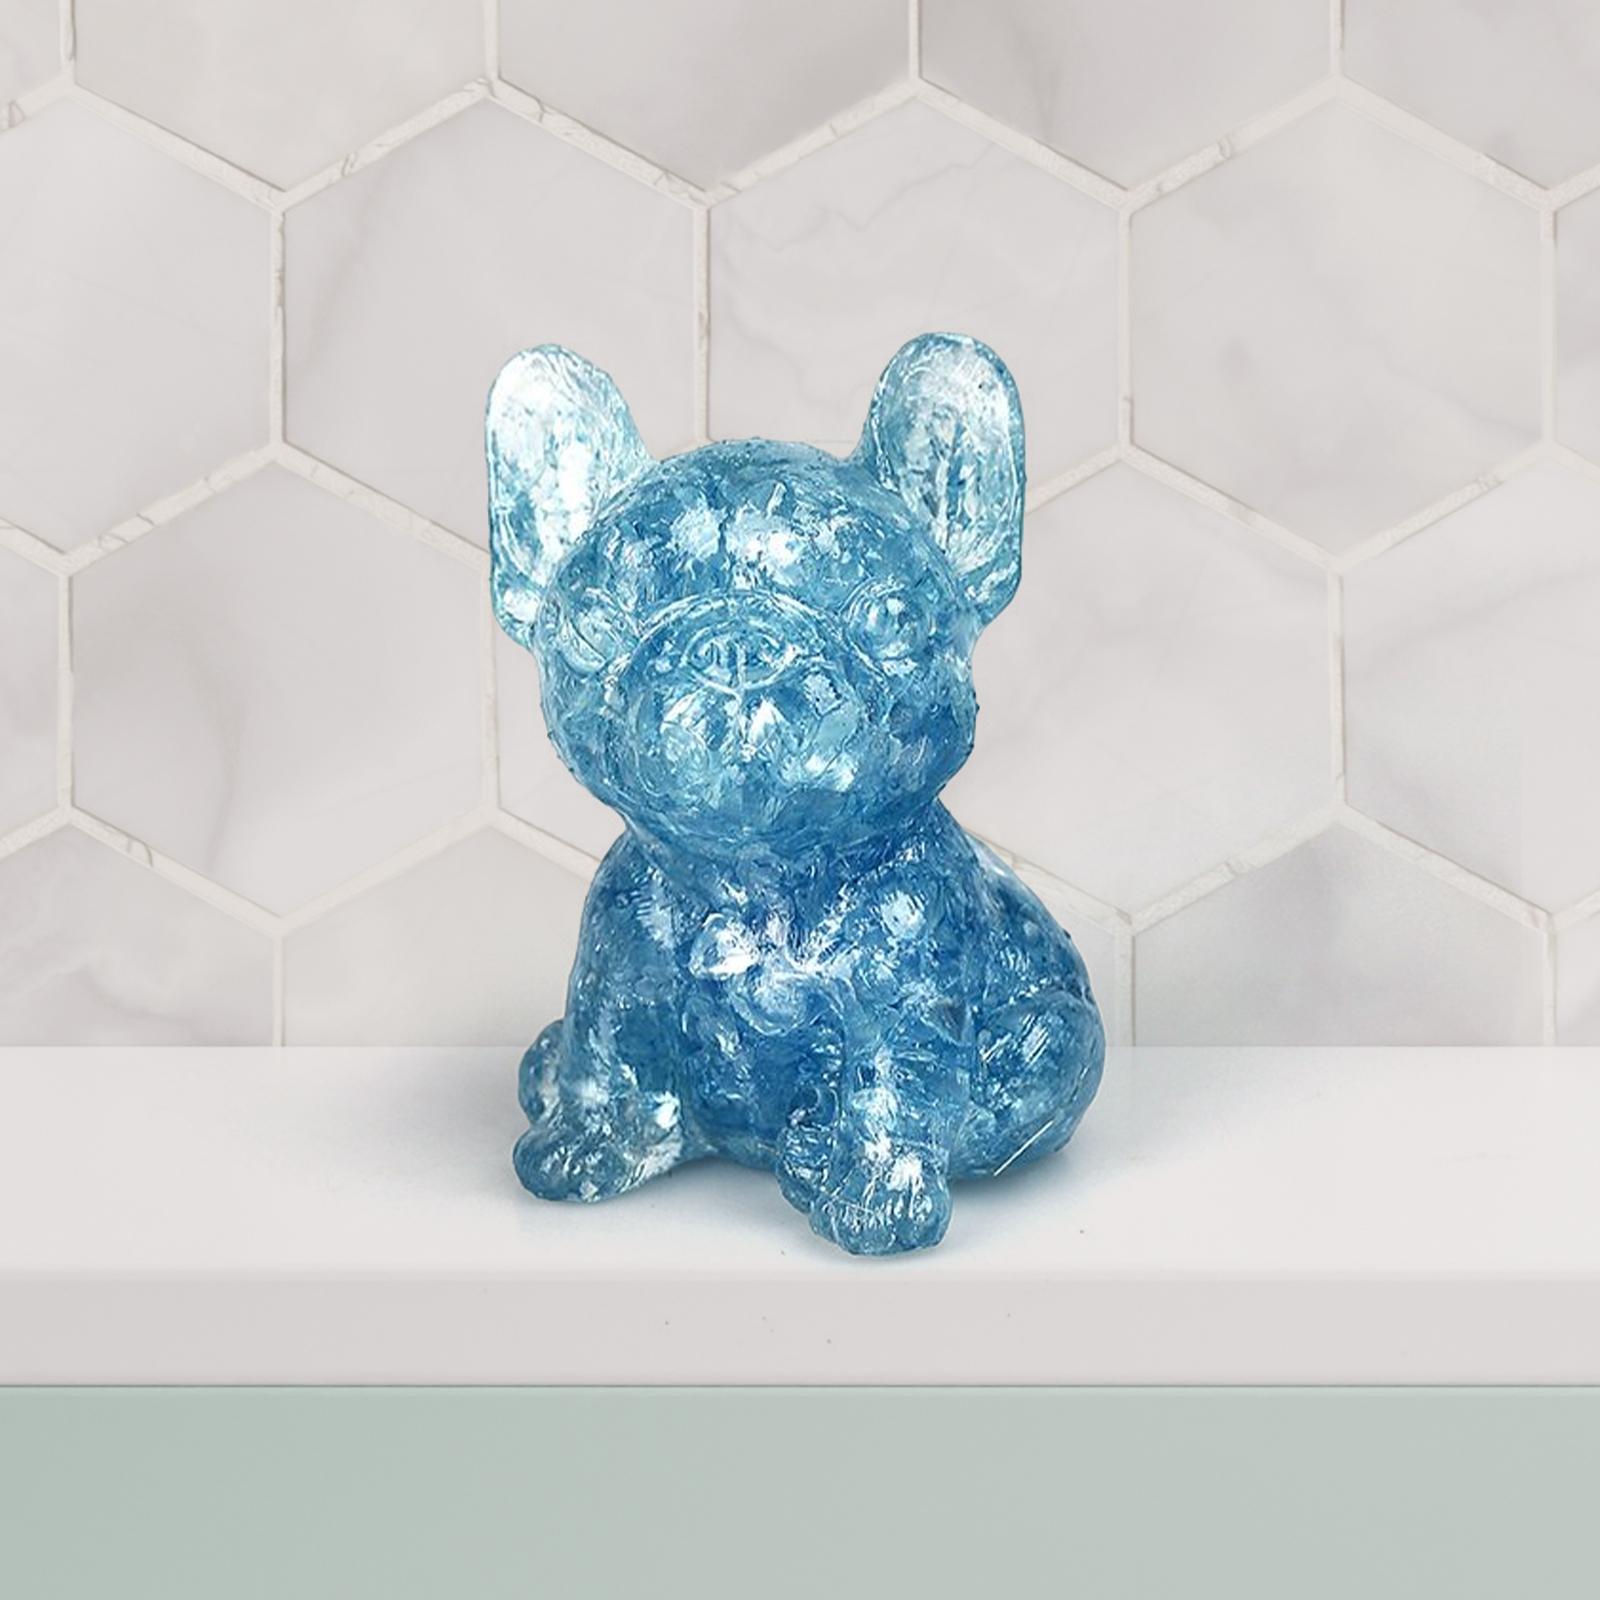 French Bulldog Figurine Ornament Small for Bedroom Desktop Collectible Blue